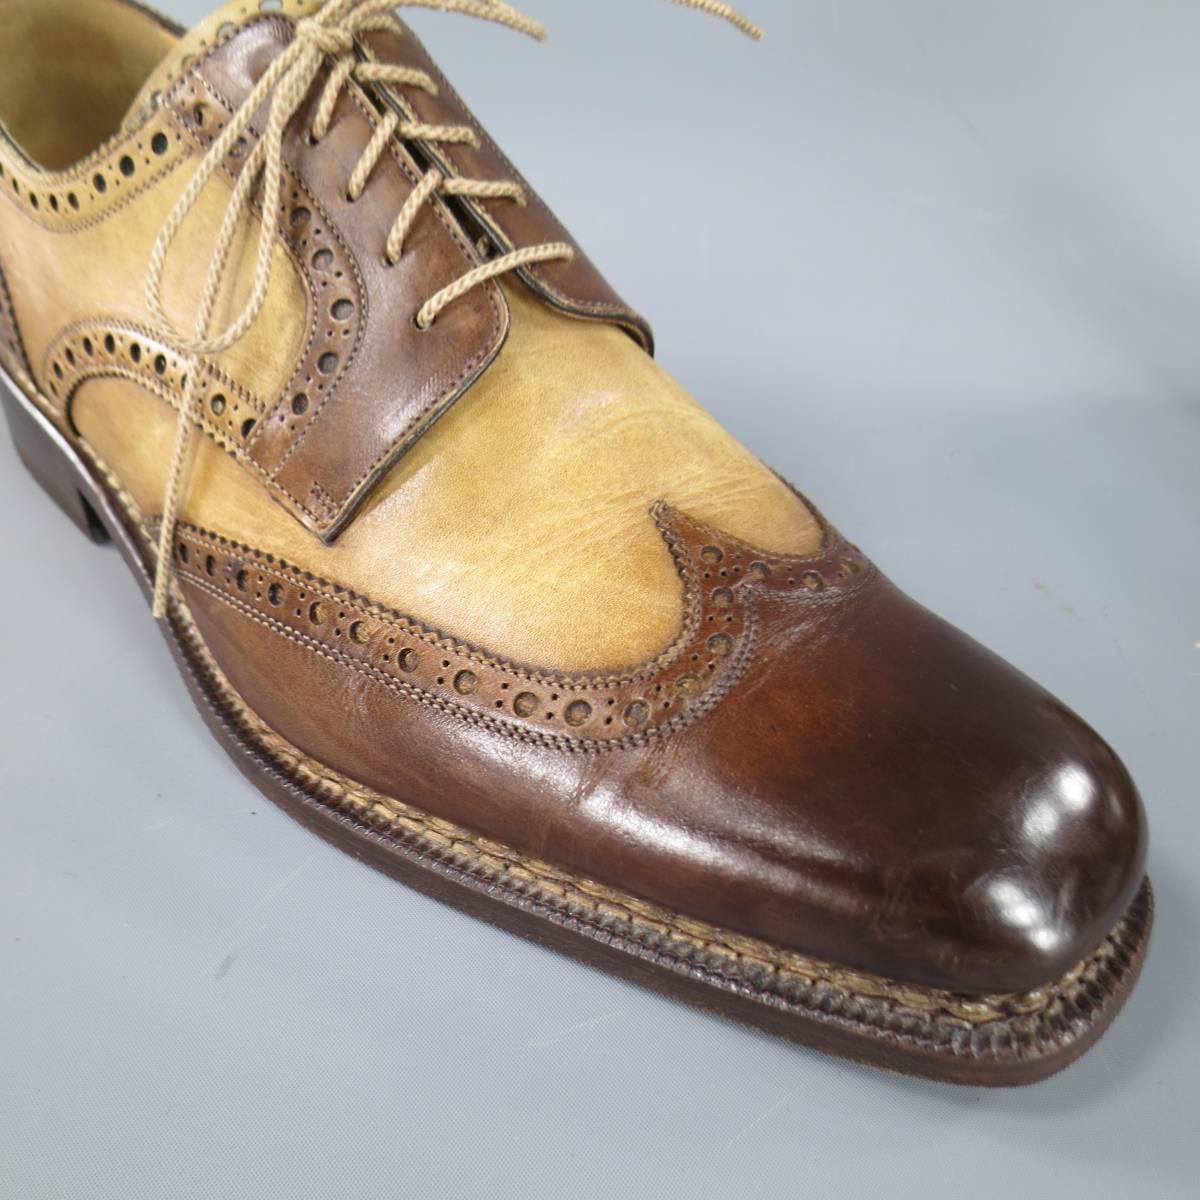 These unique CALZOLERIA HARRIS two tone Spectator shoes come in distressed beige leather with brown leather wingtip and brogue piping. Made in Italy.
 
Good Pre-Owned Condition.
Marked: 9
 
12.25 x 4.5 in.
